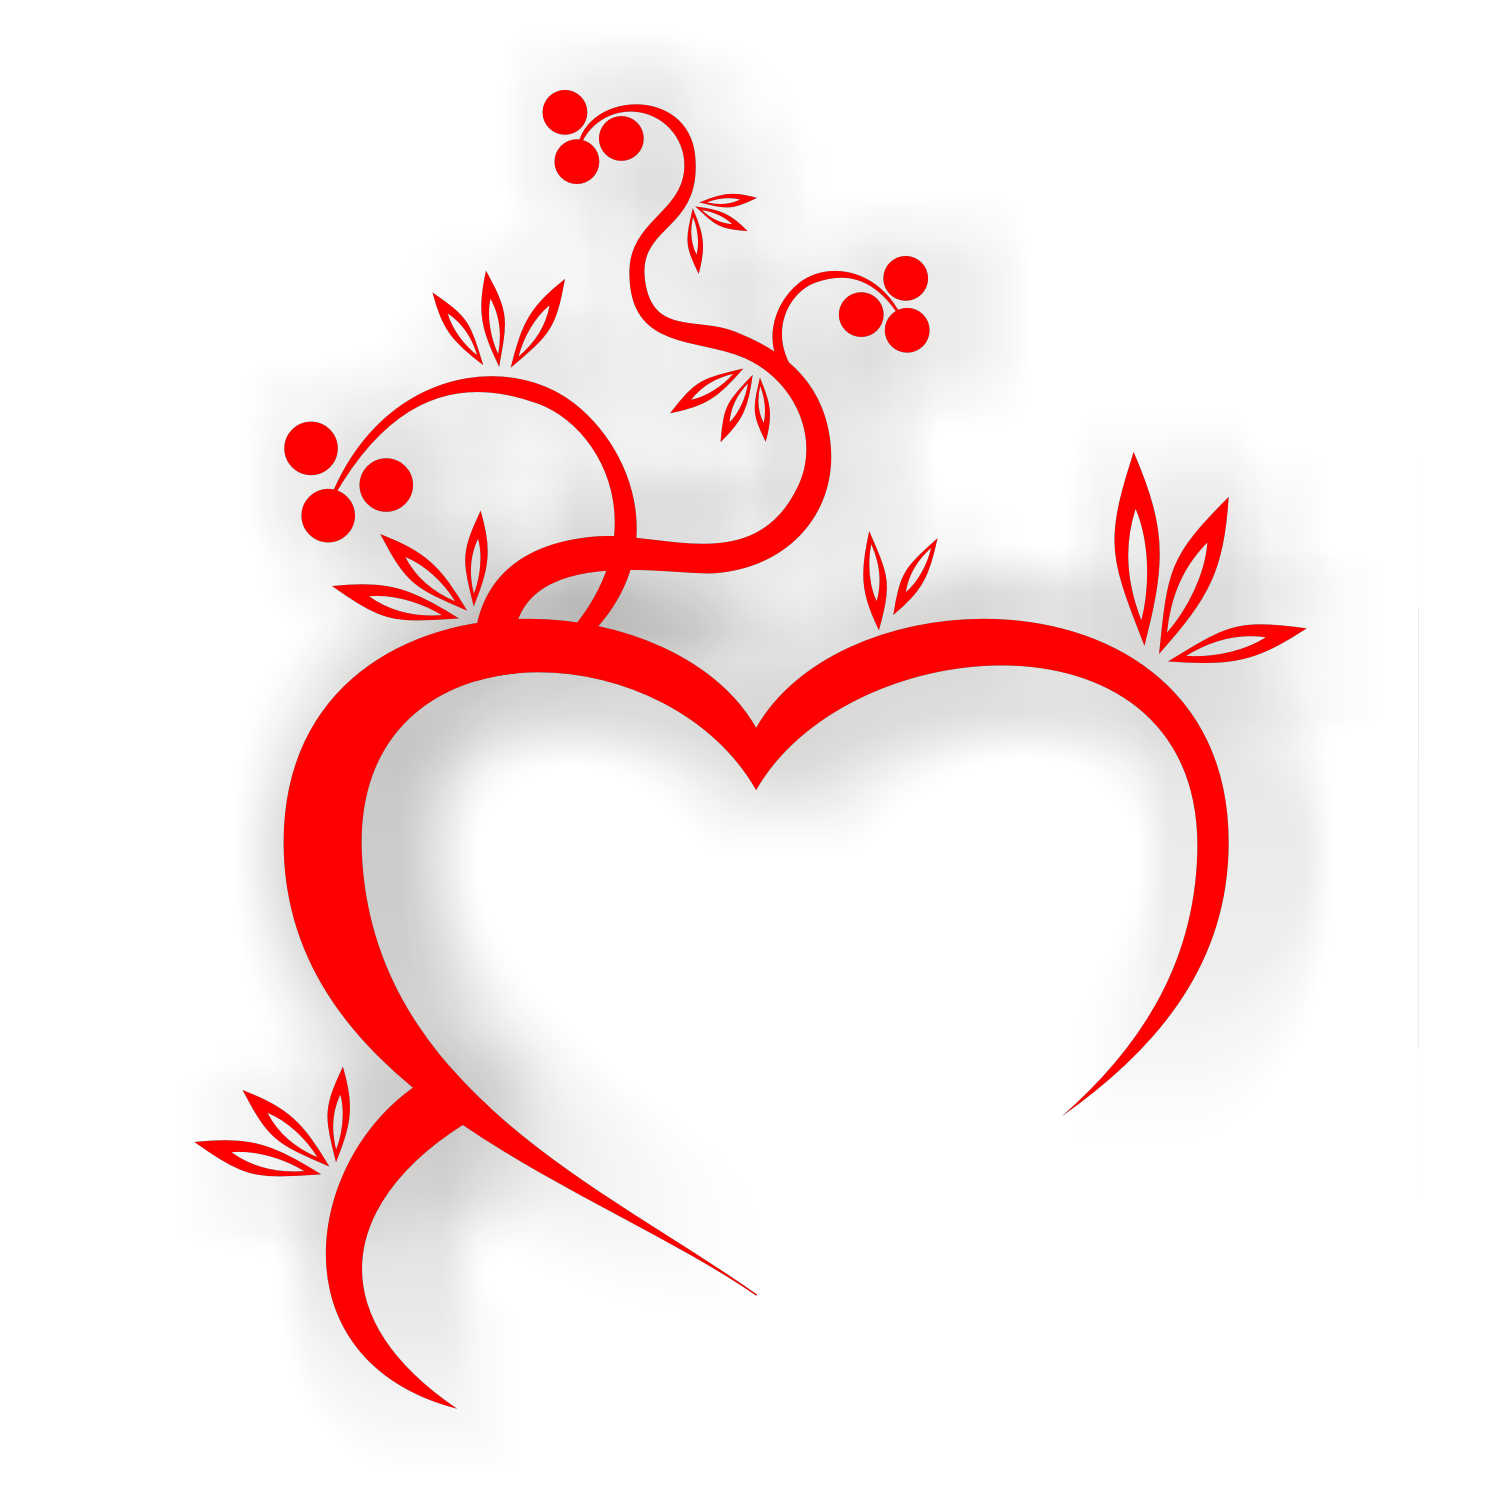 Heart Vector Png - Clipart library